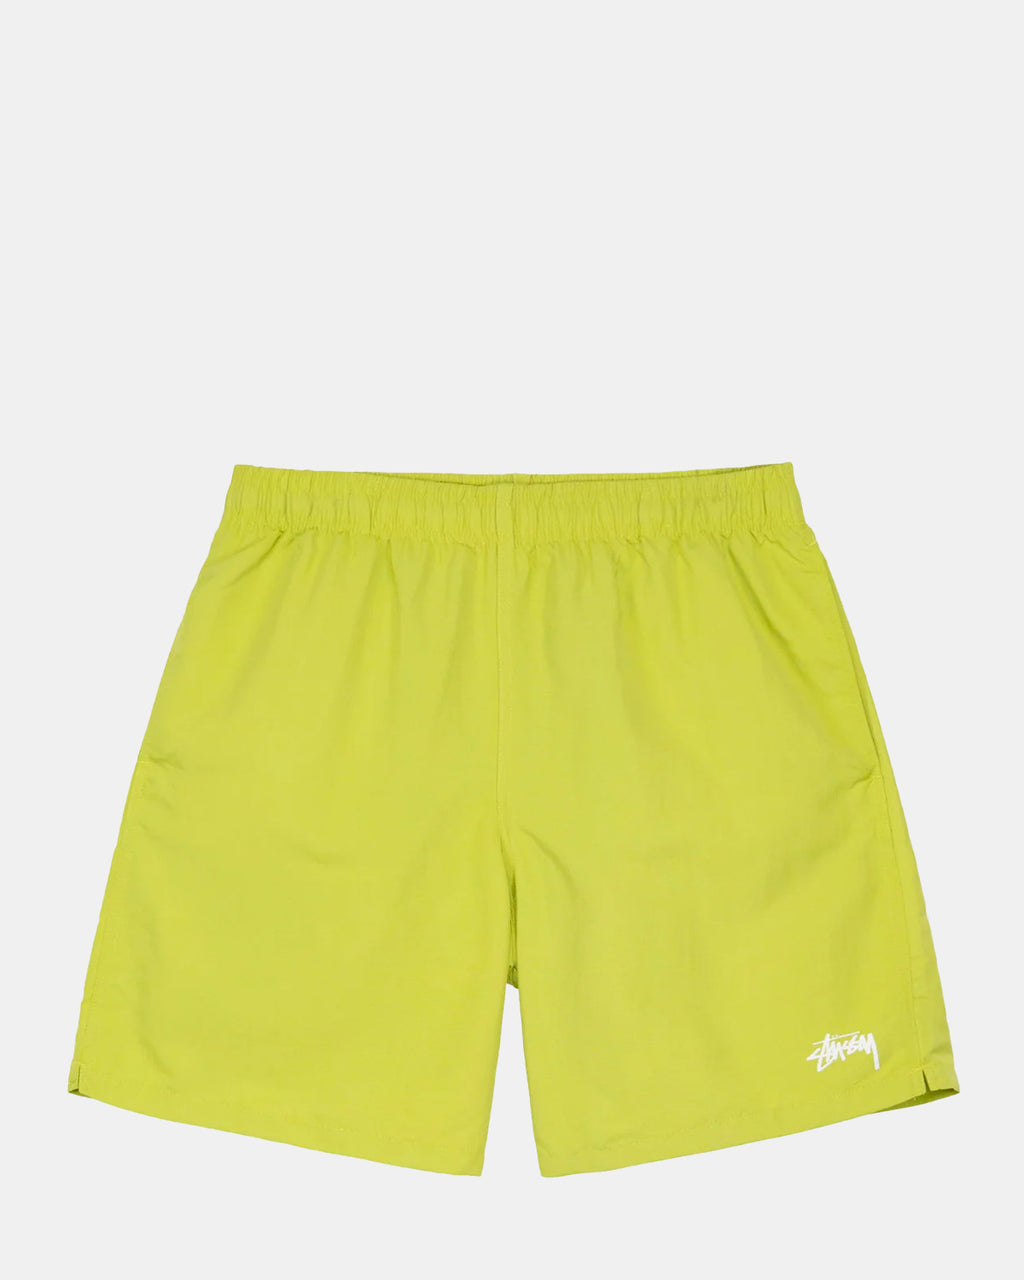 Stock Water Short (Lime) – atmos USA